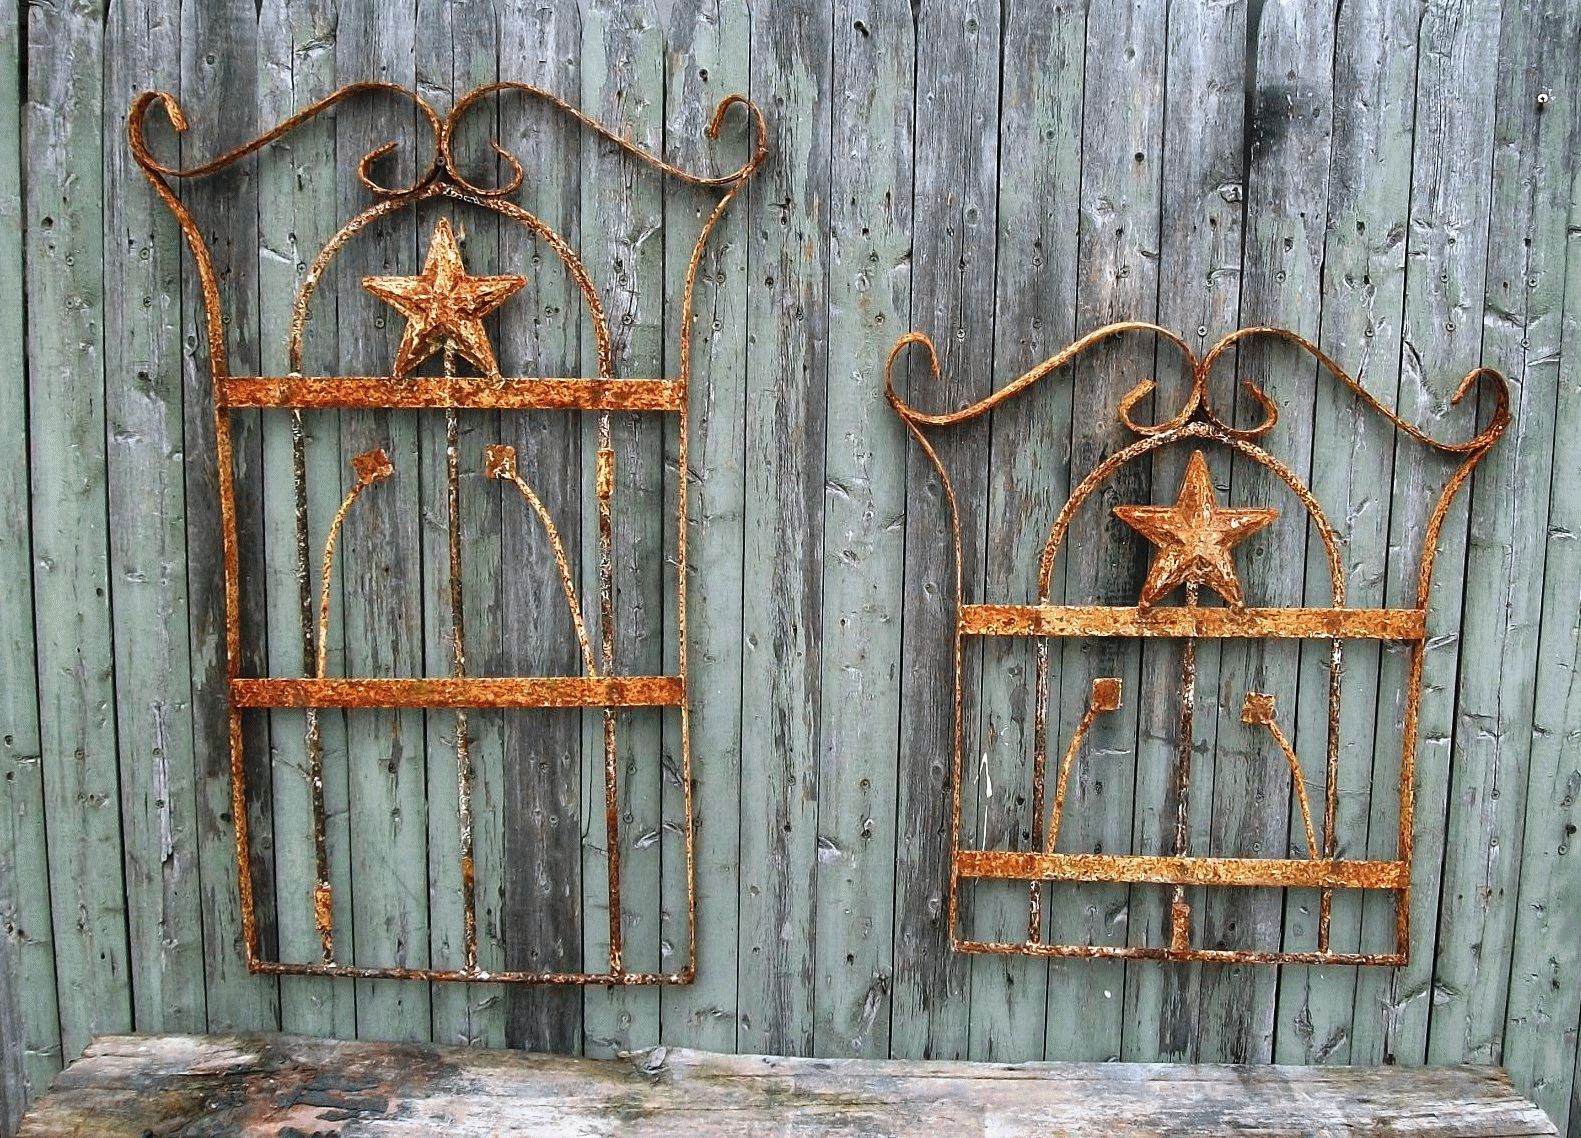 Chase Wrought Iron Art Work Metal Star Intended For 2018 Inexpensive Metal Wall Art (View 10 of 20)